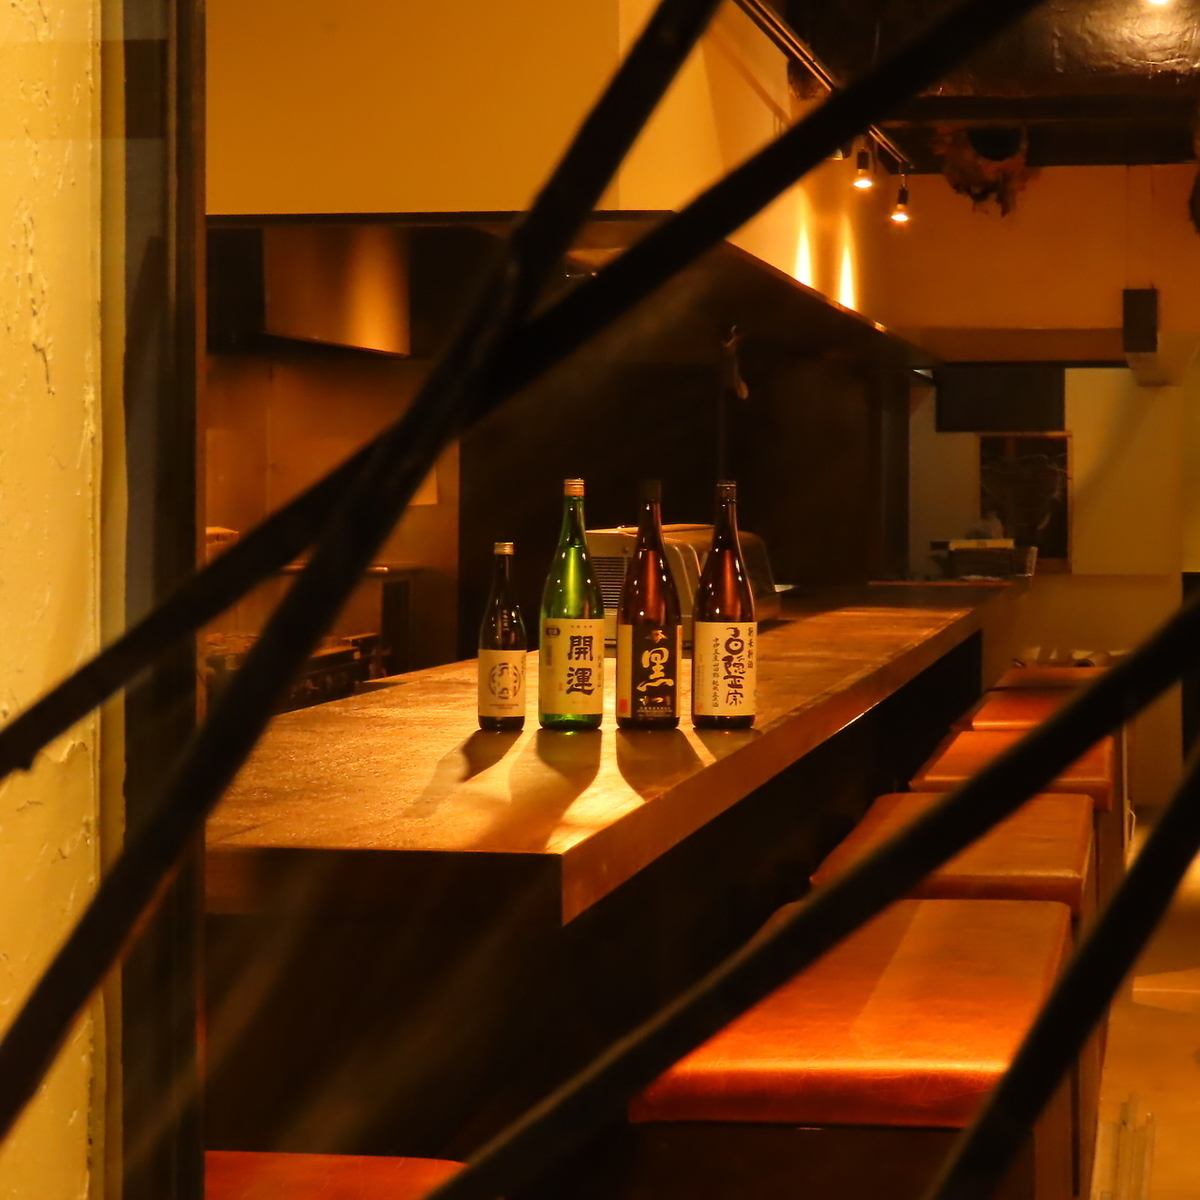 The second floor has private rooms of various sizes.Relax without worrying about your surroundings